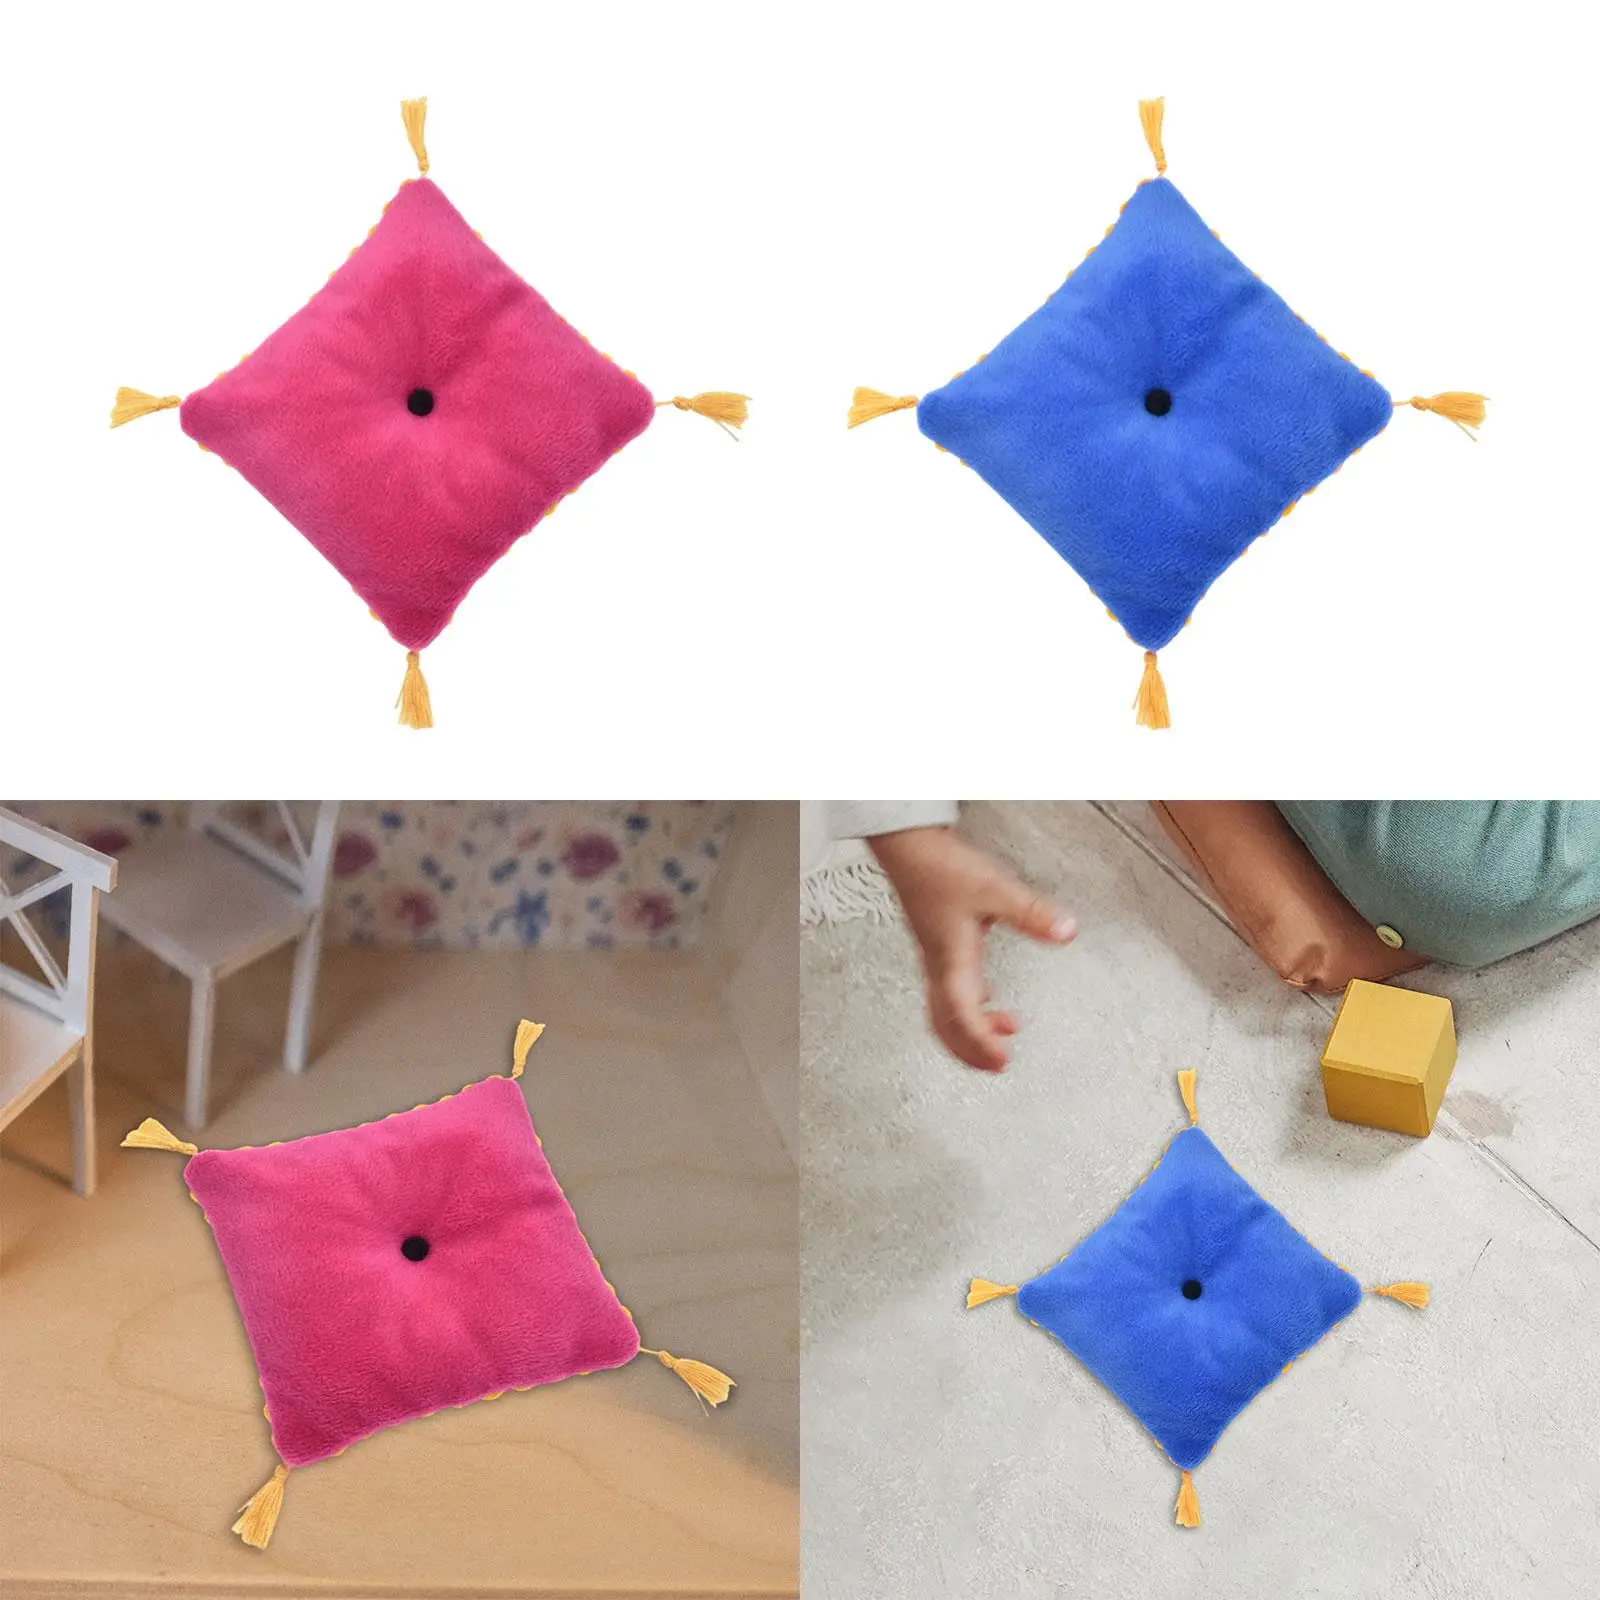 1:6 Scale Dollhouse Pillow Scenery Decor Photo Props Pretend Play Micro Landscape Ornament for Children Boys Girls Kids Gifts